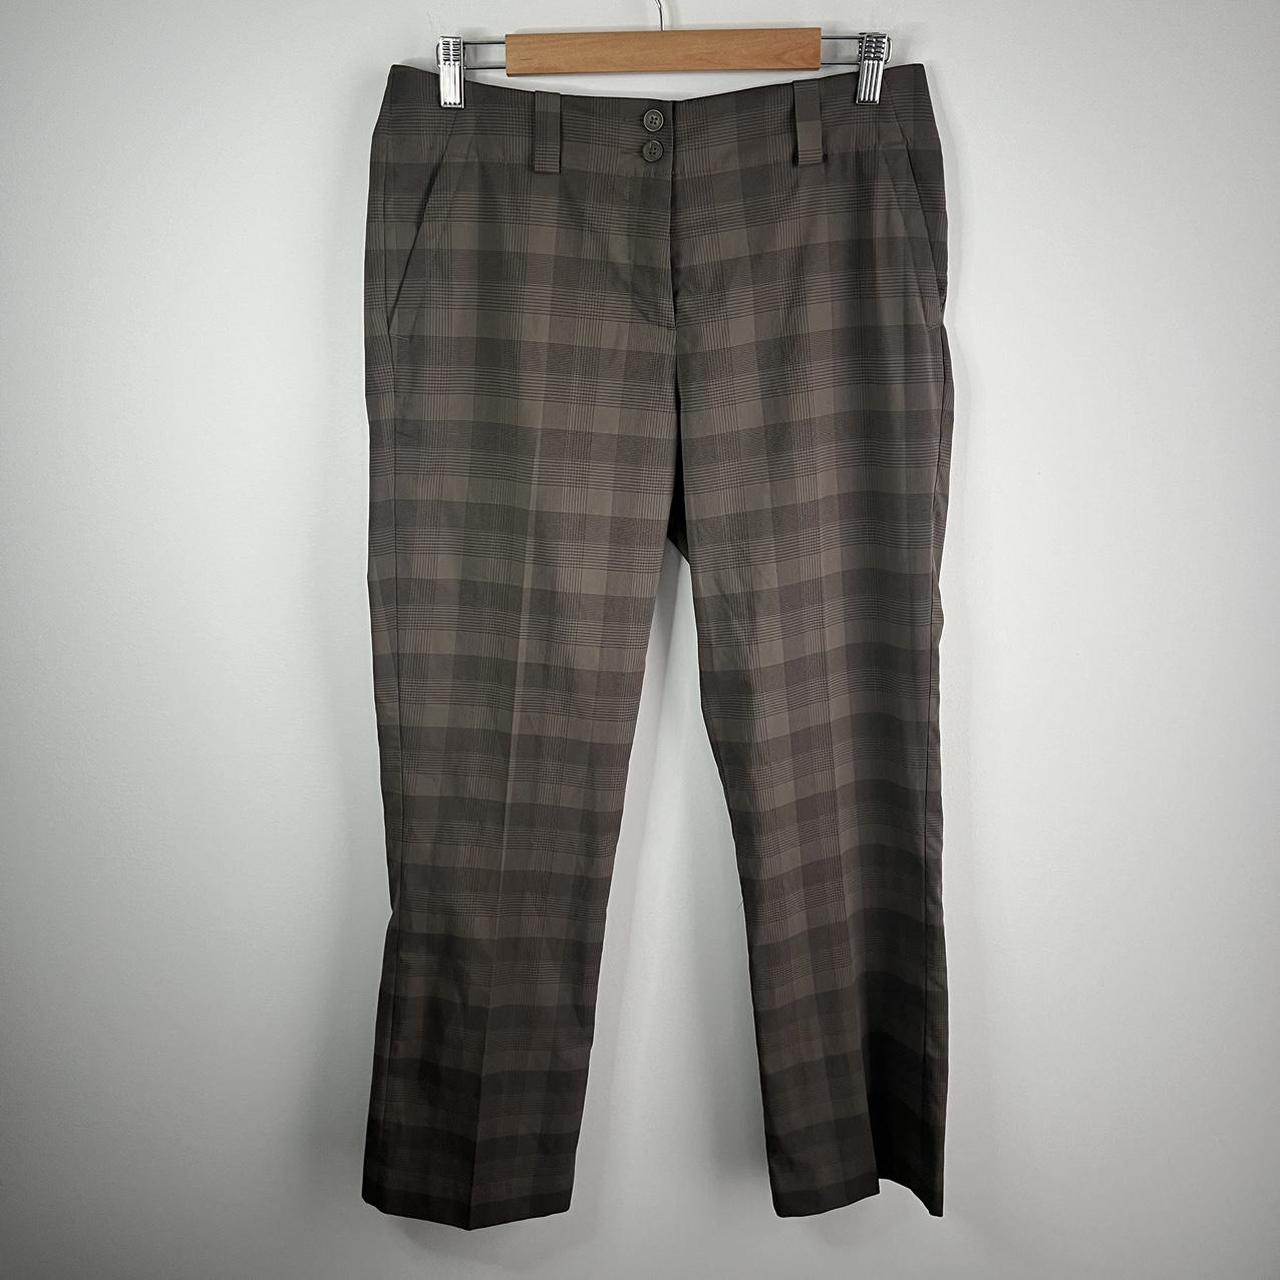 Nike Golf Plaid Trousers Armory Slate just £49.99 - Trousers and Shorts at  Shop247.co.uk